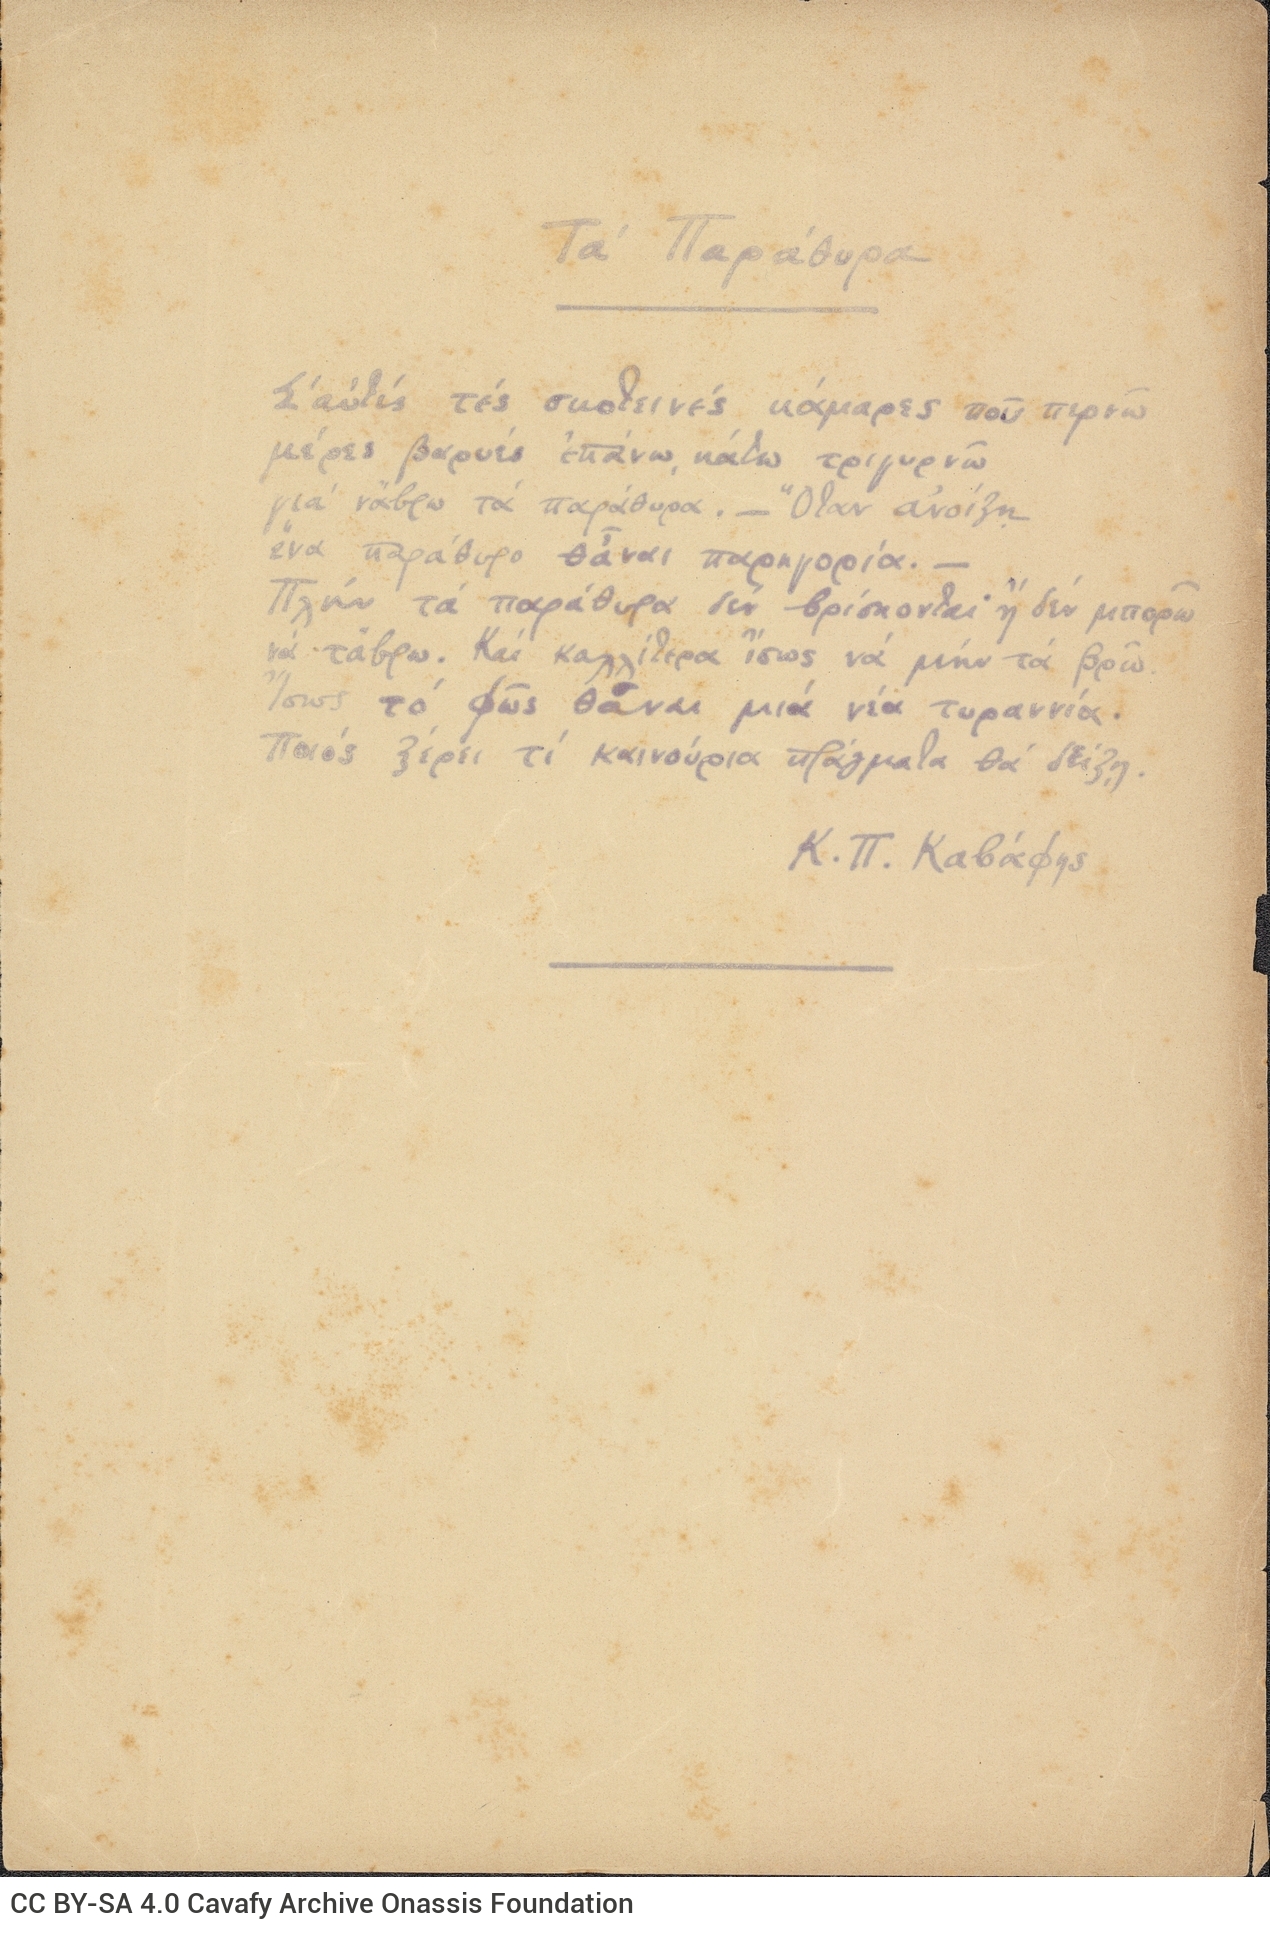 Polygraphed copy of a handwritten poem ("The Windows"). Signed: "C. P. Cavafy".